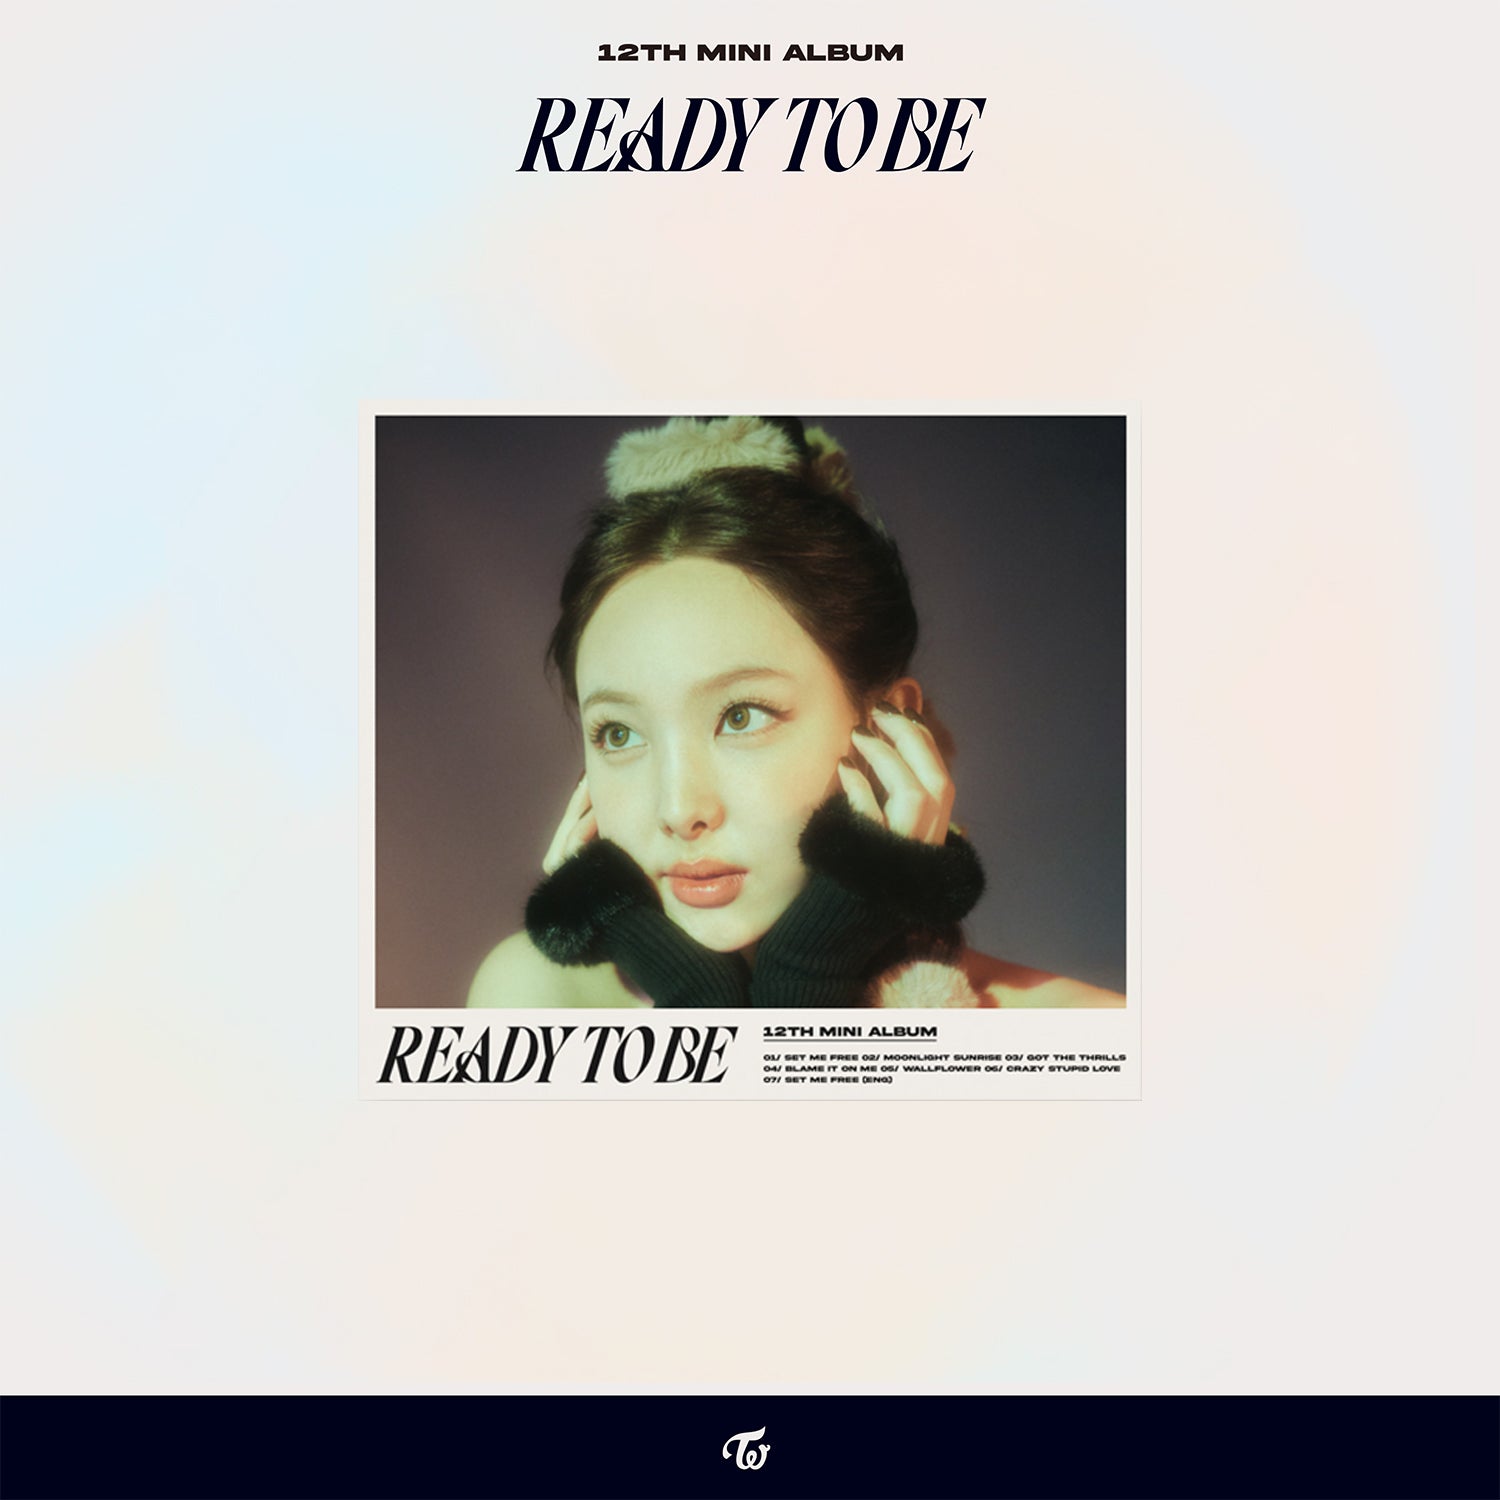 TWICE - The 12th Mini Album: READY TO BE (Album Packaging / Merchandise  Preview - Revealed) : r/kpop